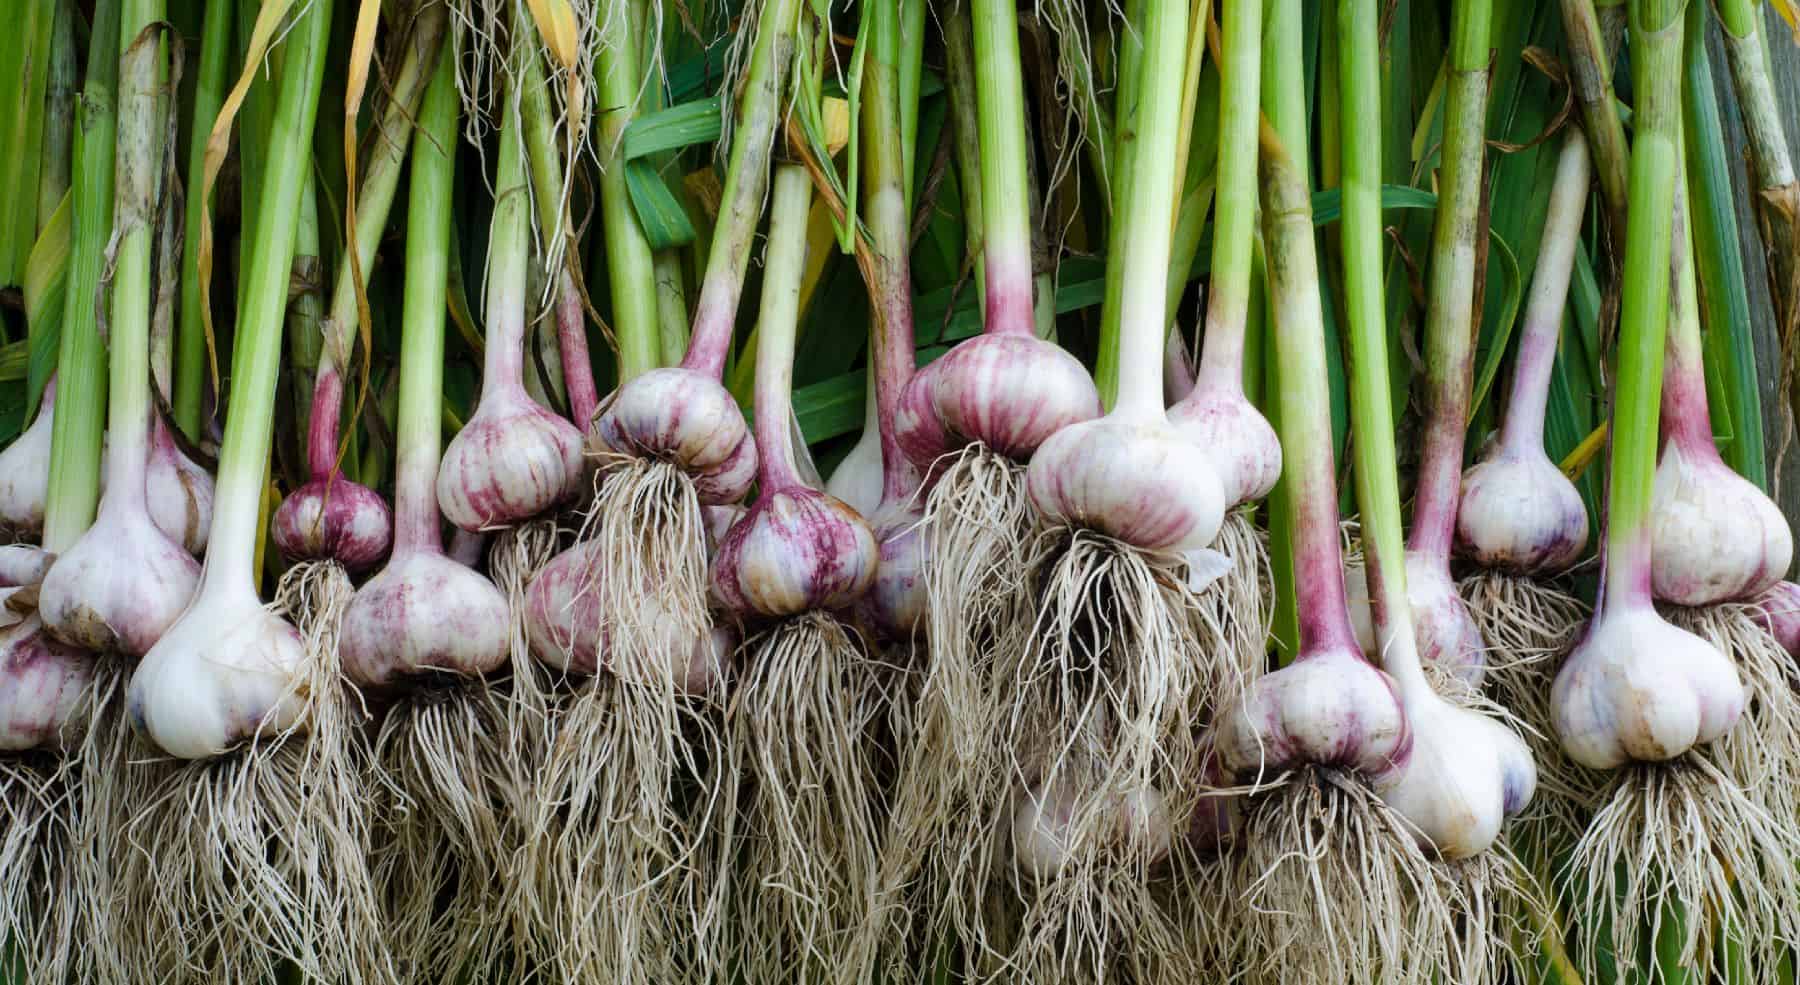 How to Grow and Harvest Garlic